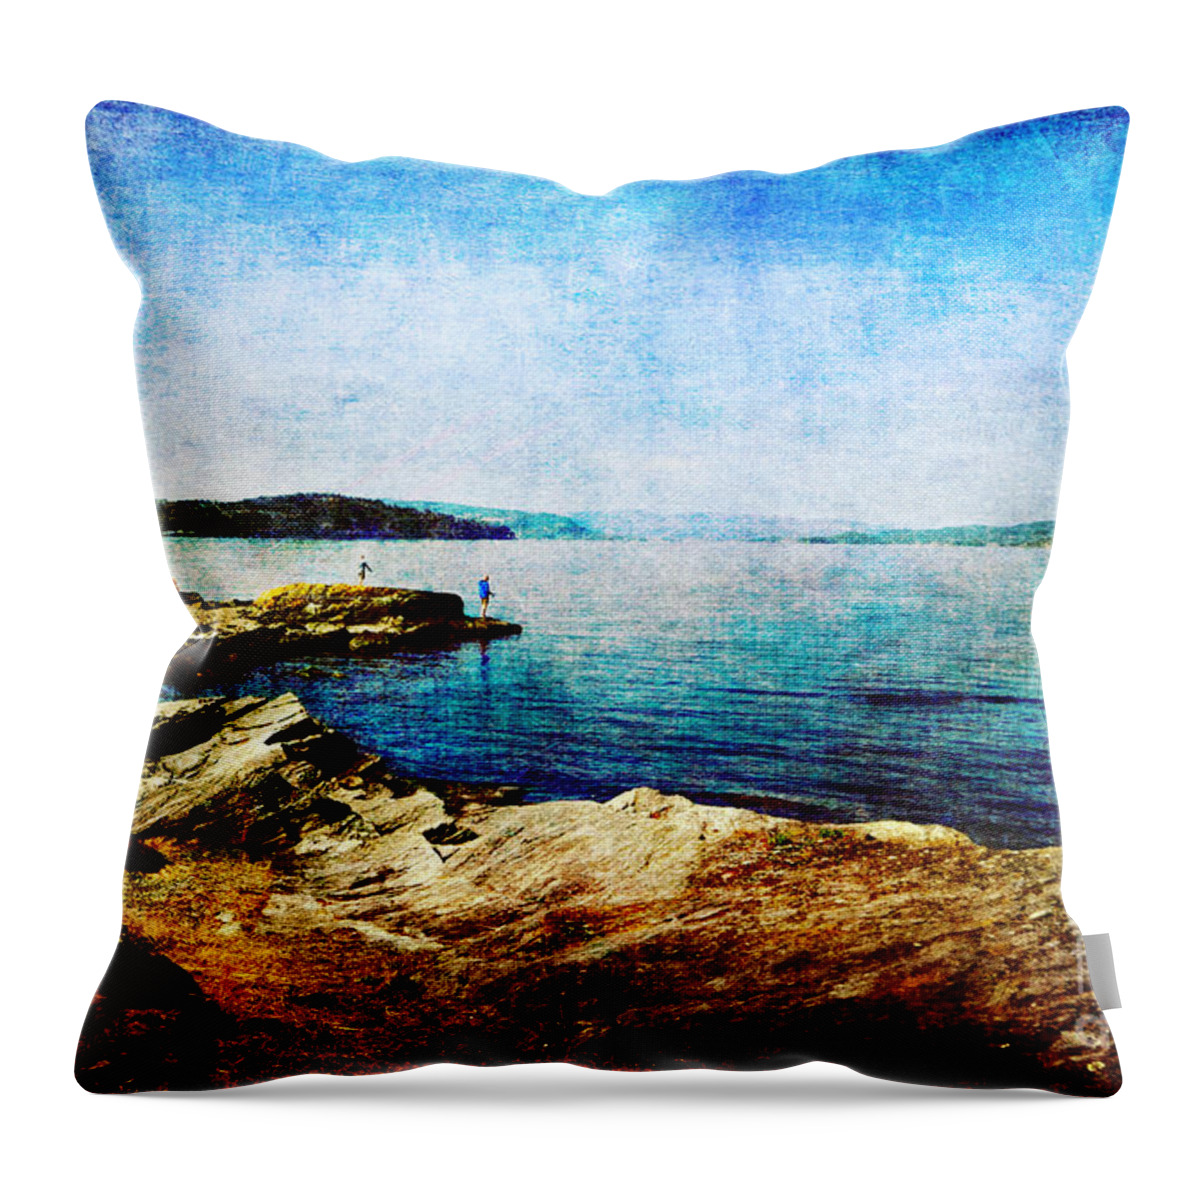 Fishing Throw Pillow featuring the photograph A Day Out by Randi Grace Nilsberg